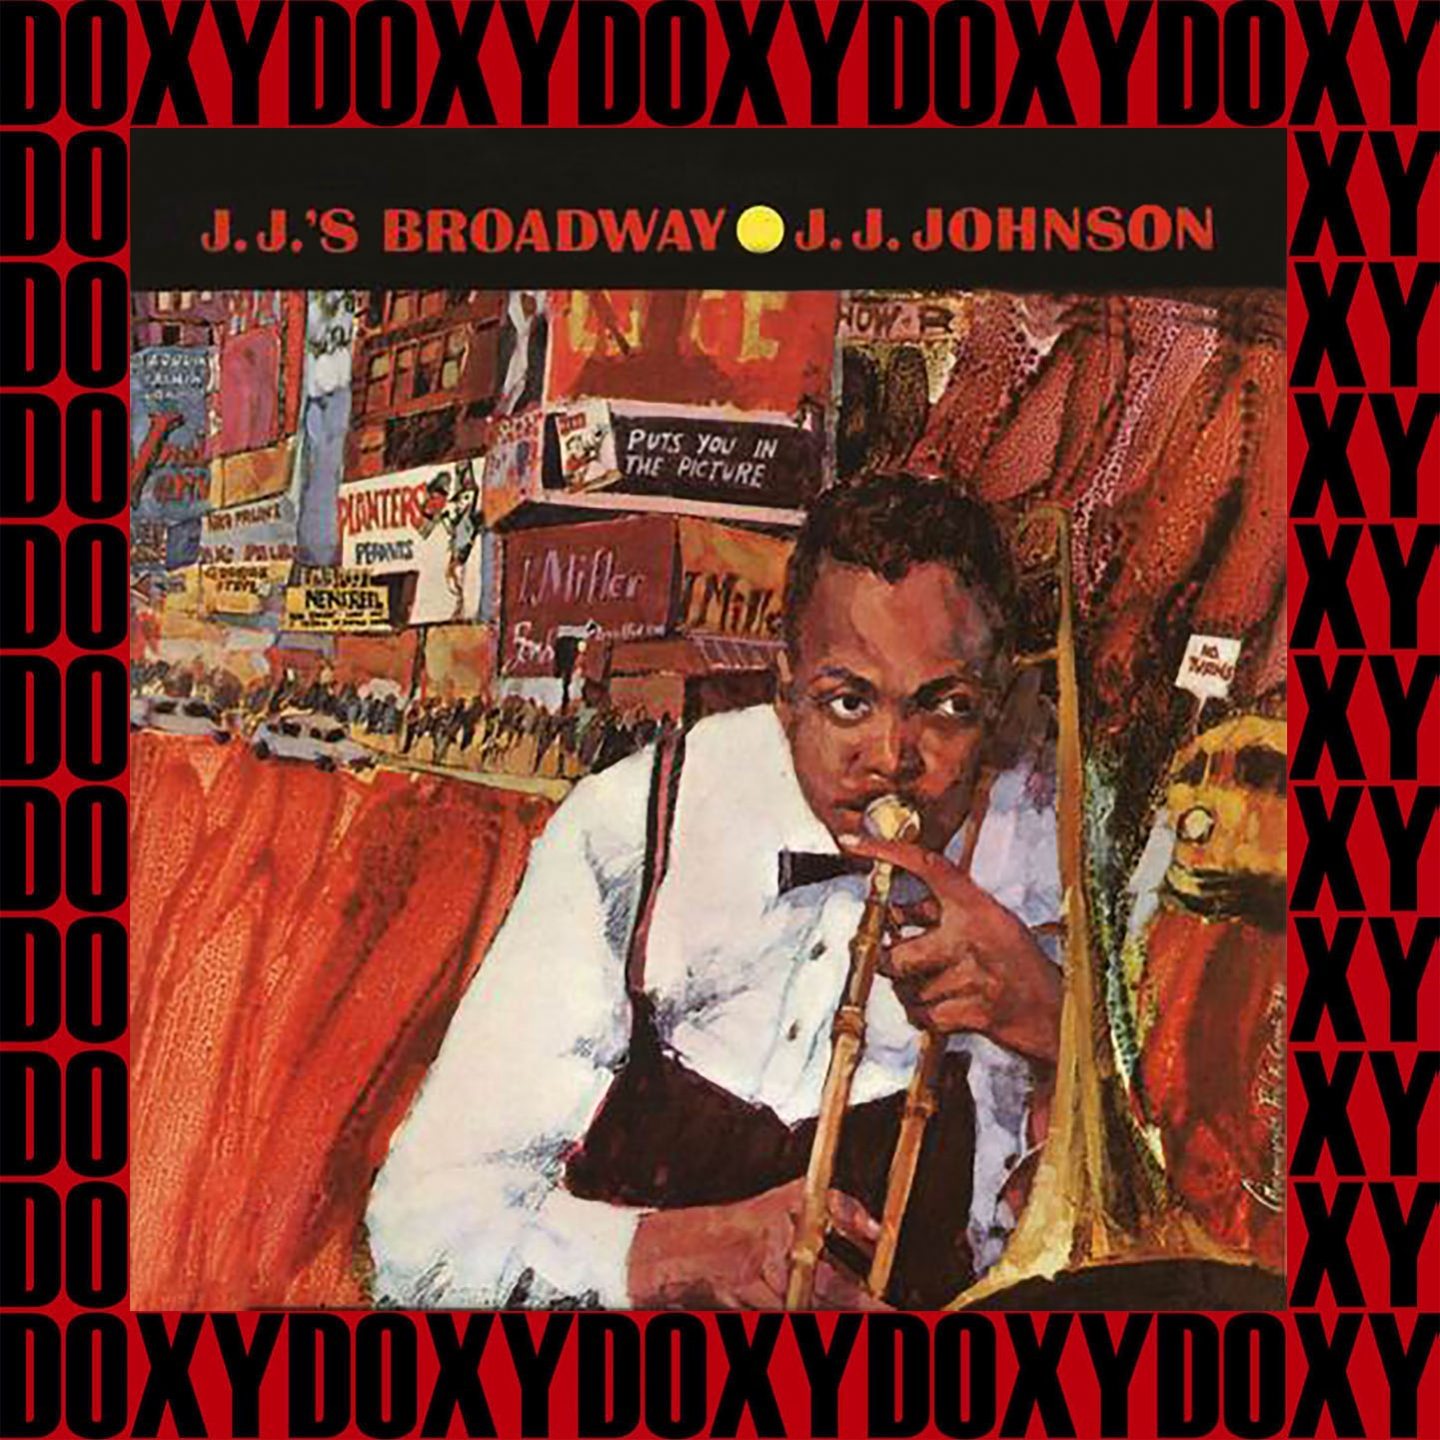 J.J.'s Broadway (Hd Remastered Edition, Doxy Collection)